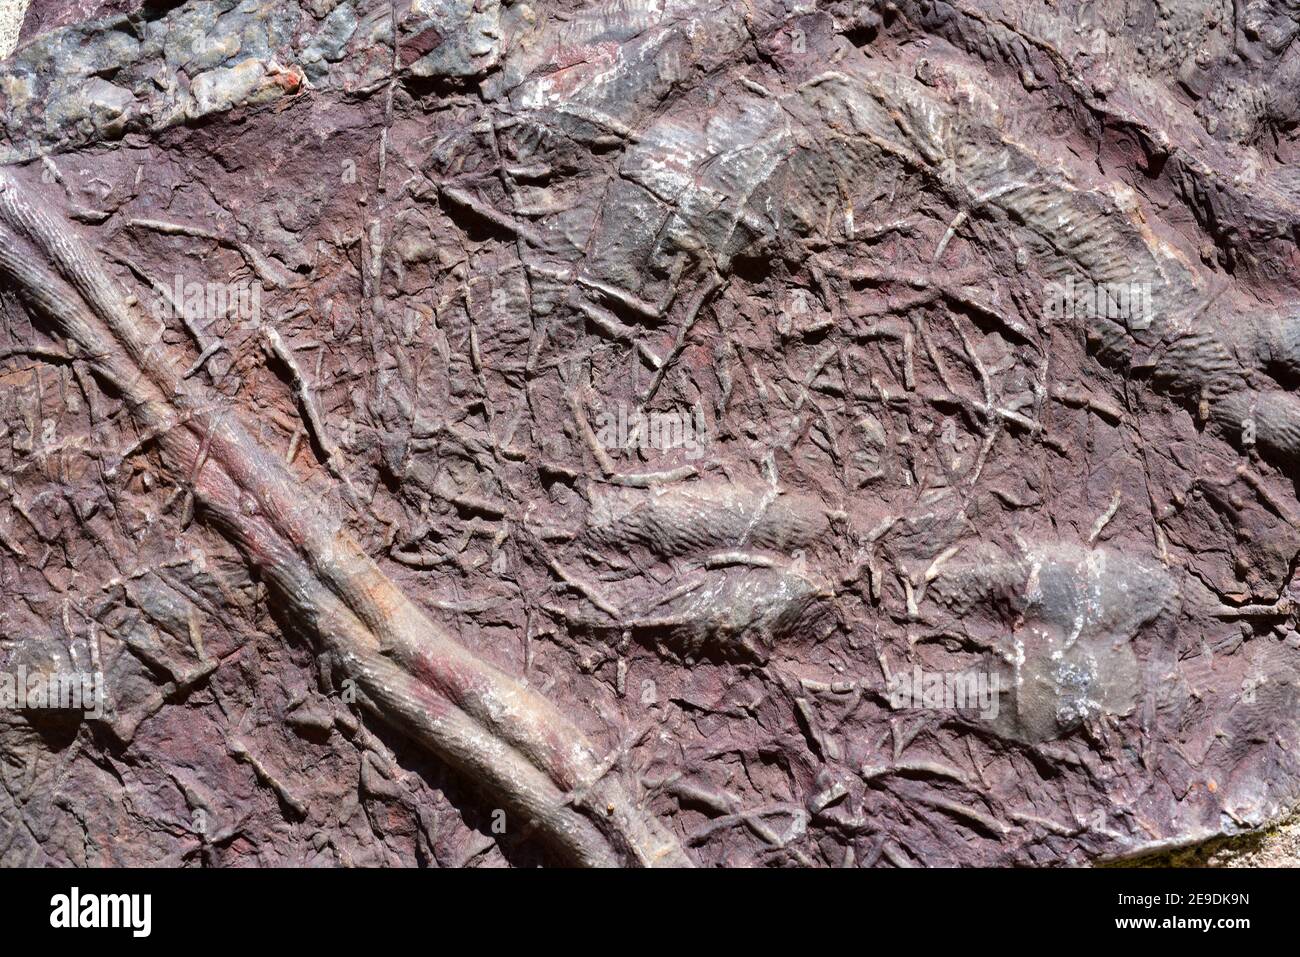 Cruziana and Rusophycus on the house wall of Monsagro (Salamanaca province). Cruziana and Rusophycus are a fossil trackways of Trilobites, fossilized Stock Photo